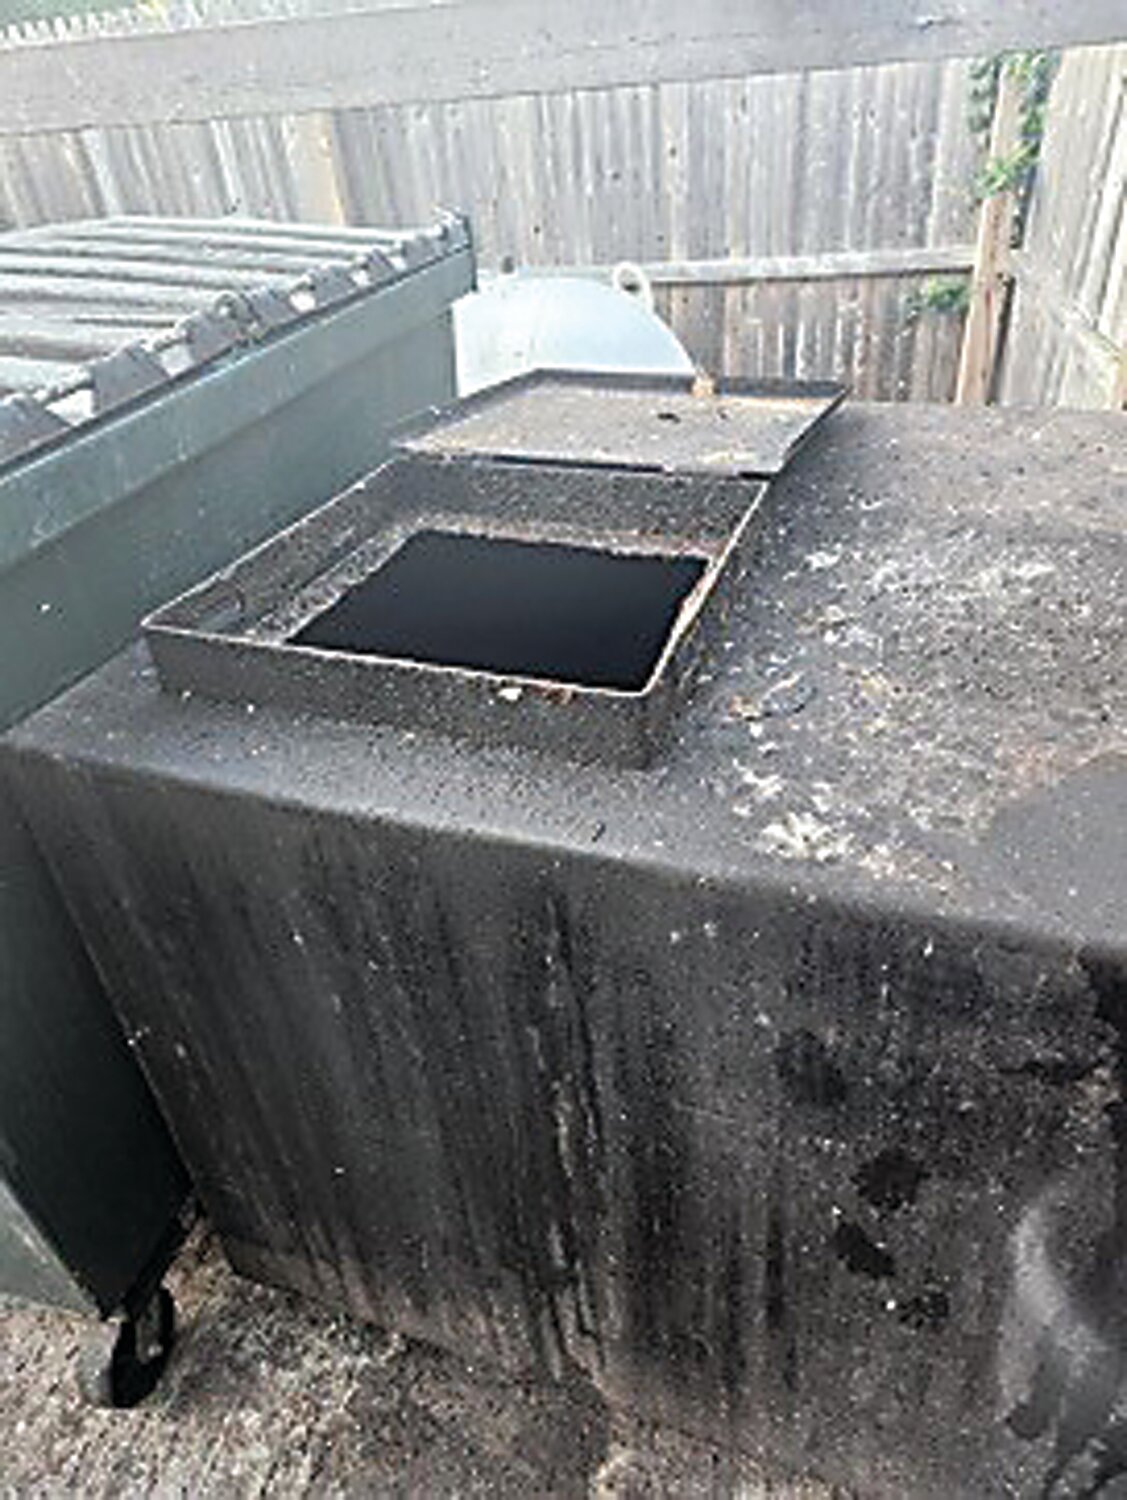 A damaged oil vat sits open after the used cooking oil was siphoned out by thieves.